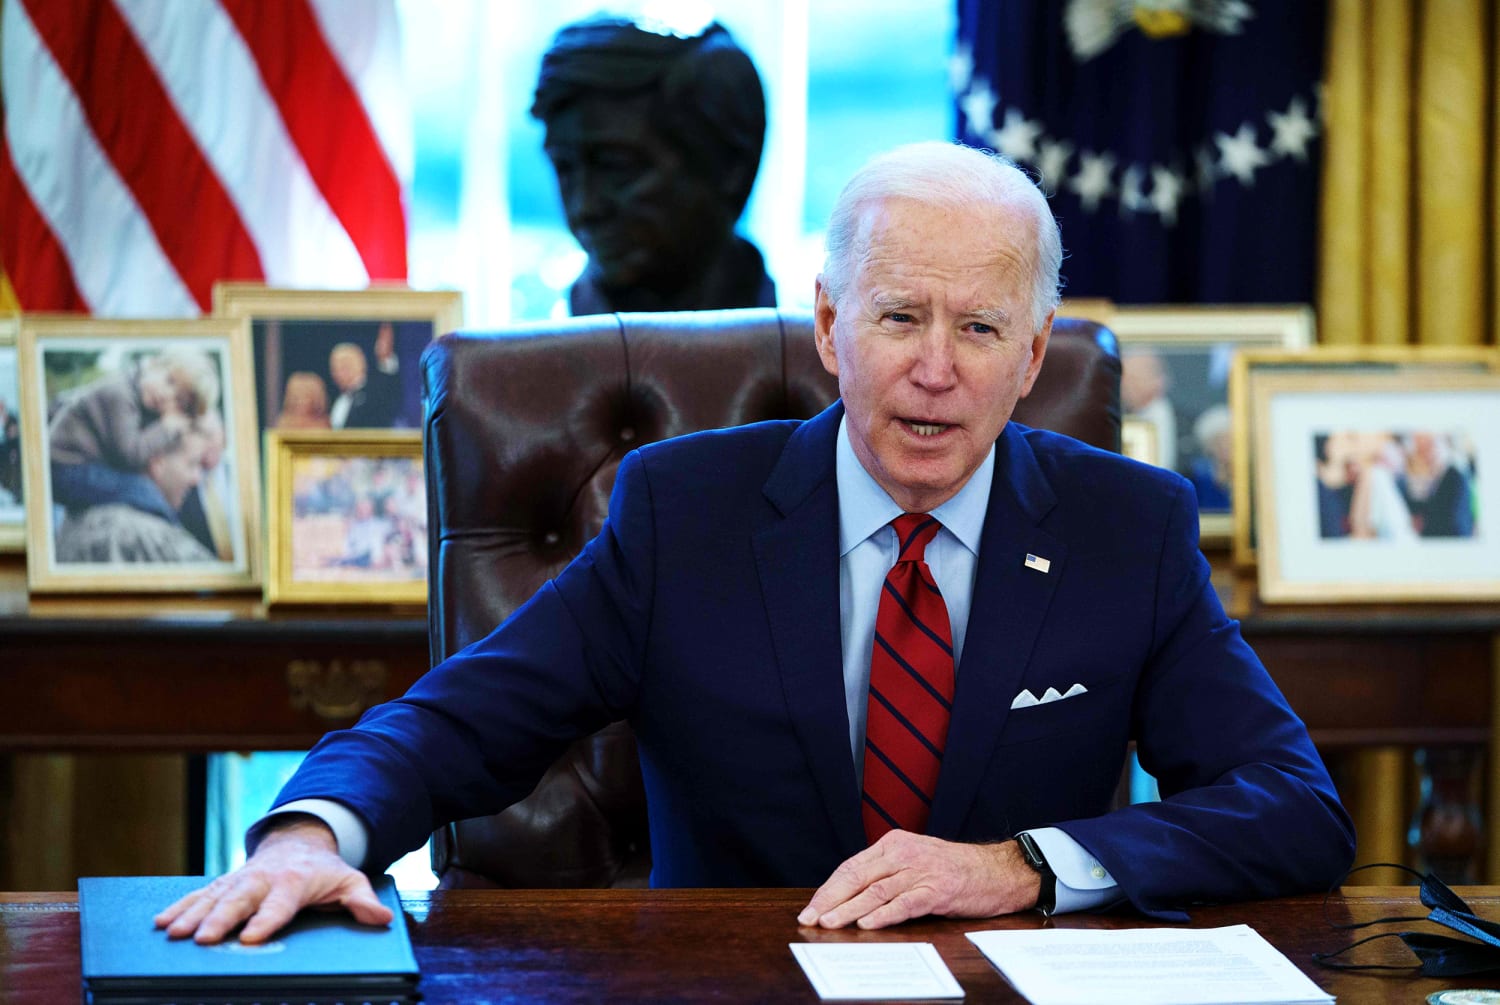 Israel-Hamas Ceasefire: Biden Pledges To Help Rebuild Gaza, Urging A Two-State Solution